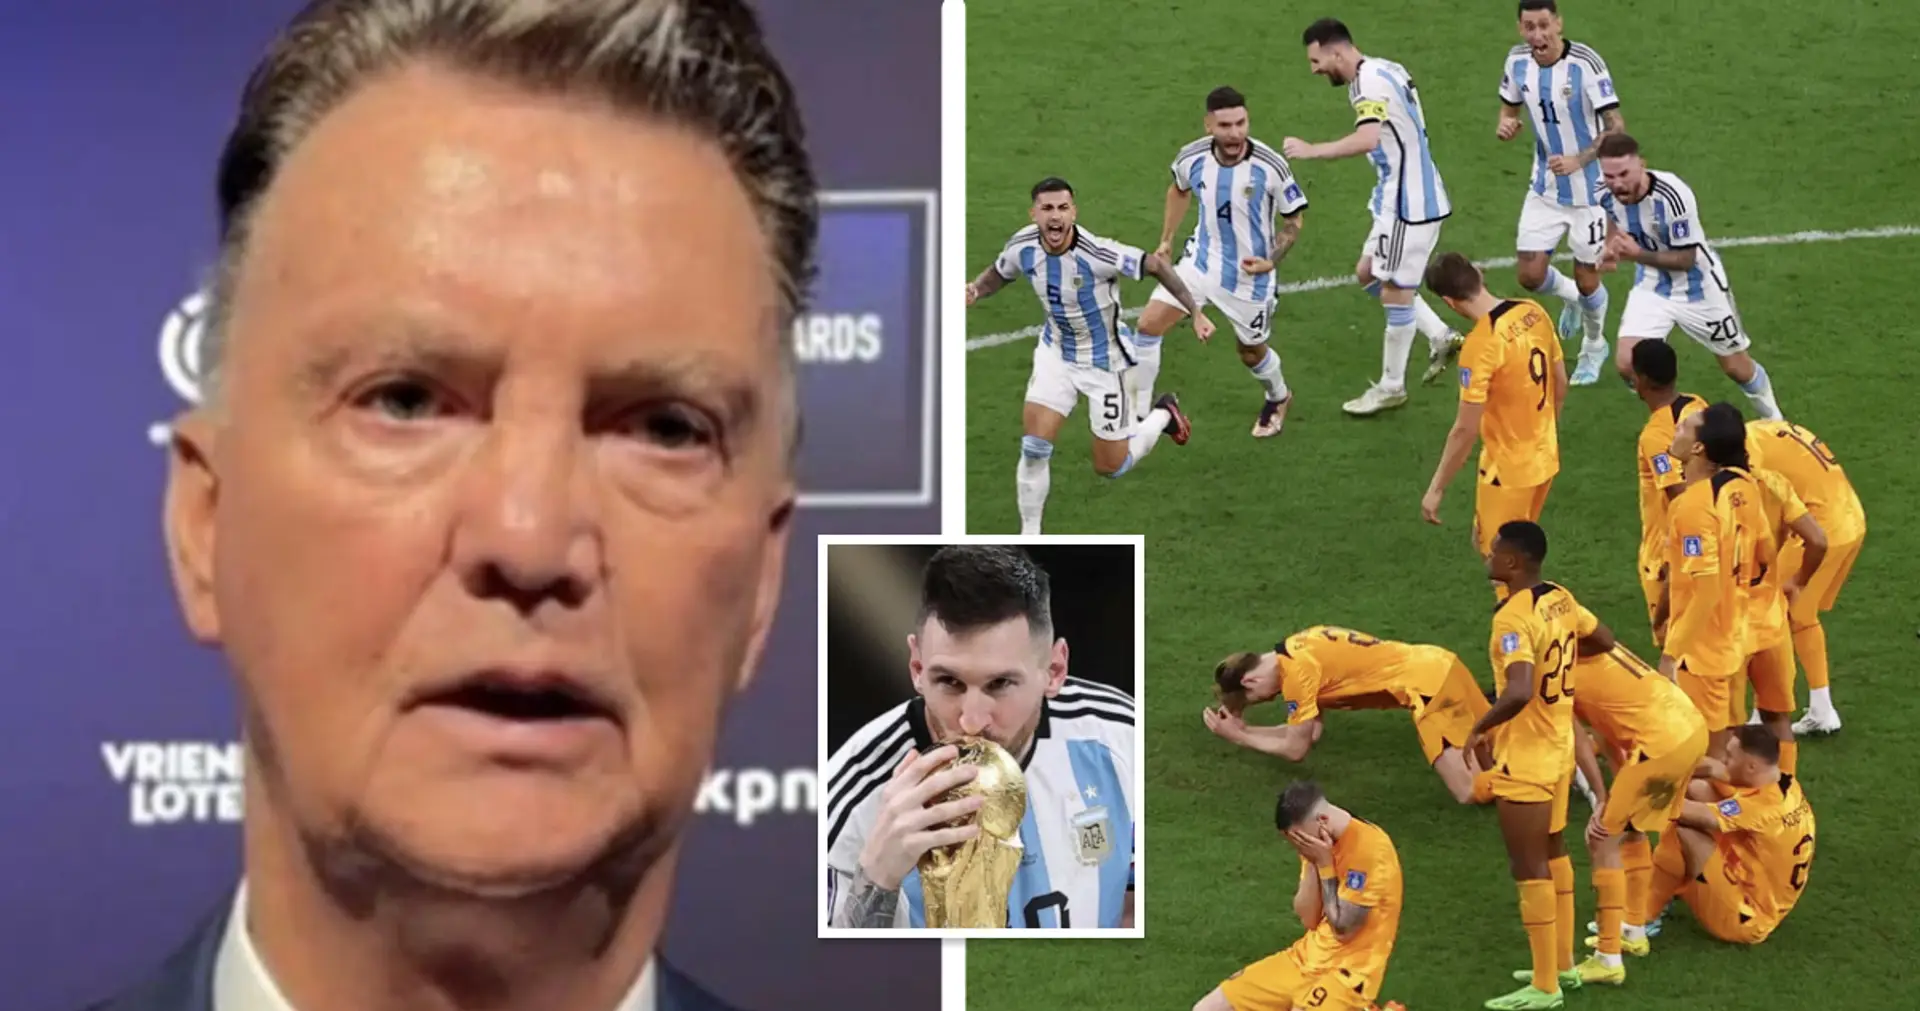 Van Gaal claims Netherlands' loss to Argentina was rigged: 'Messi had to become the world champion'